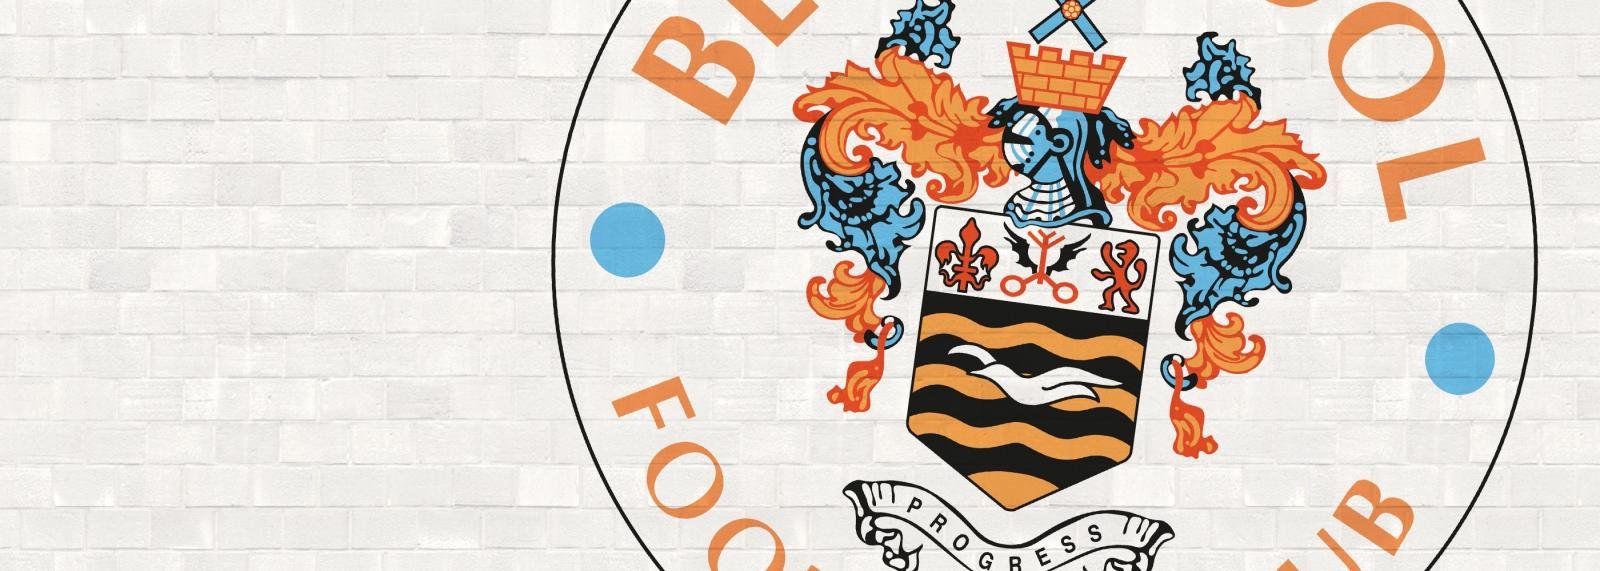 Improvements made, but Blackpool are still short